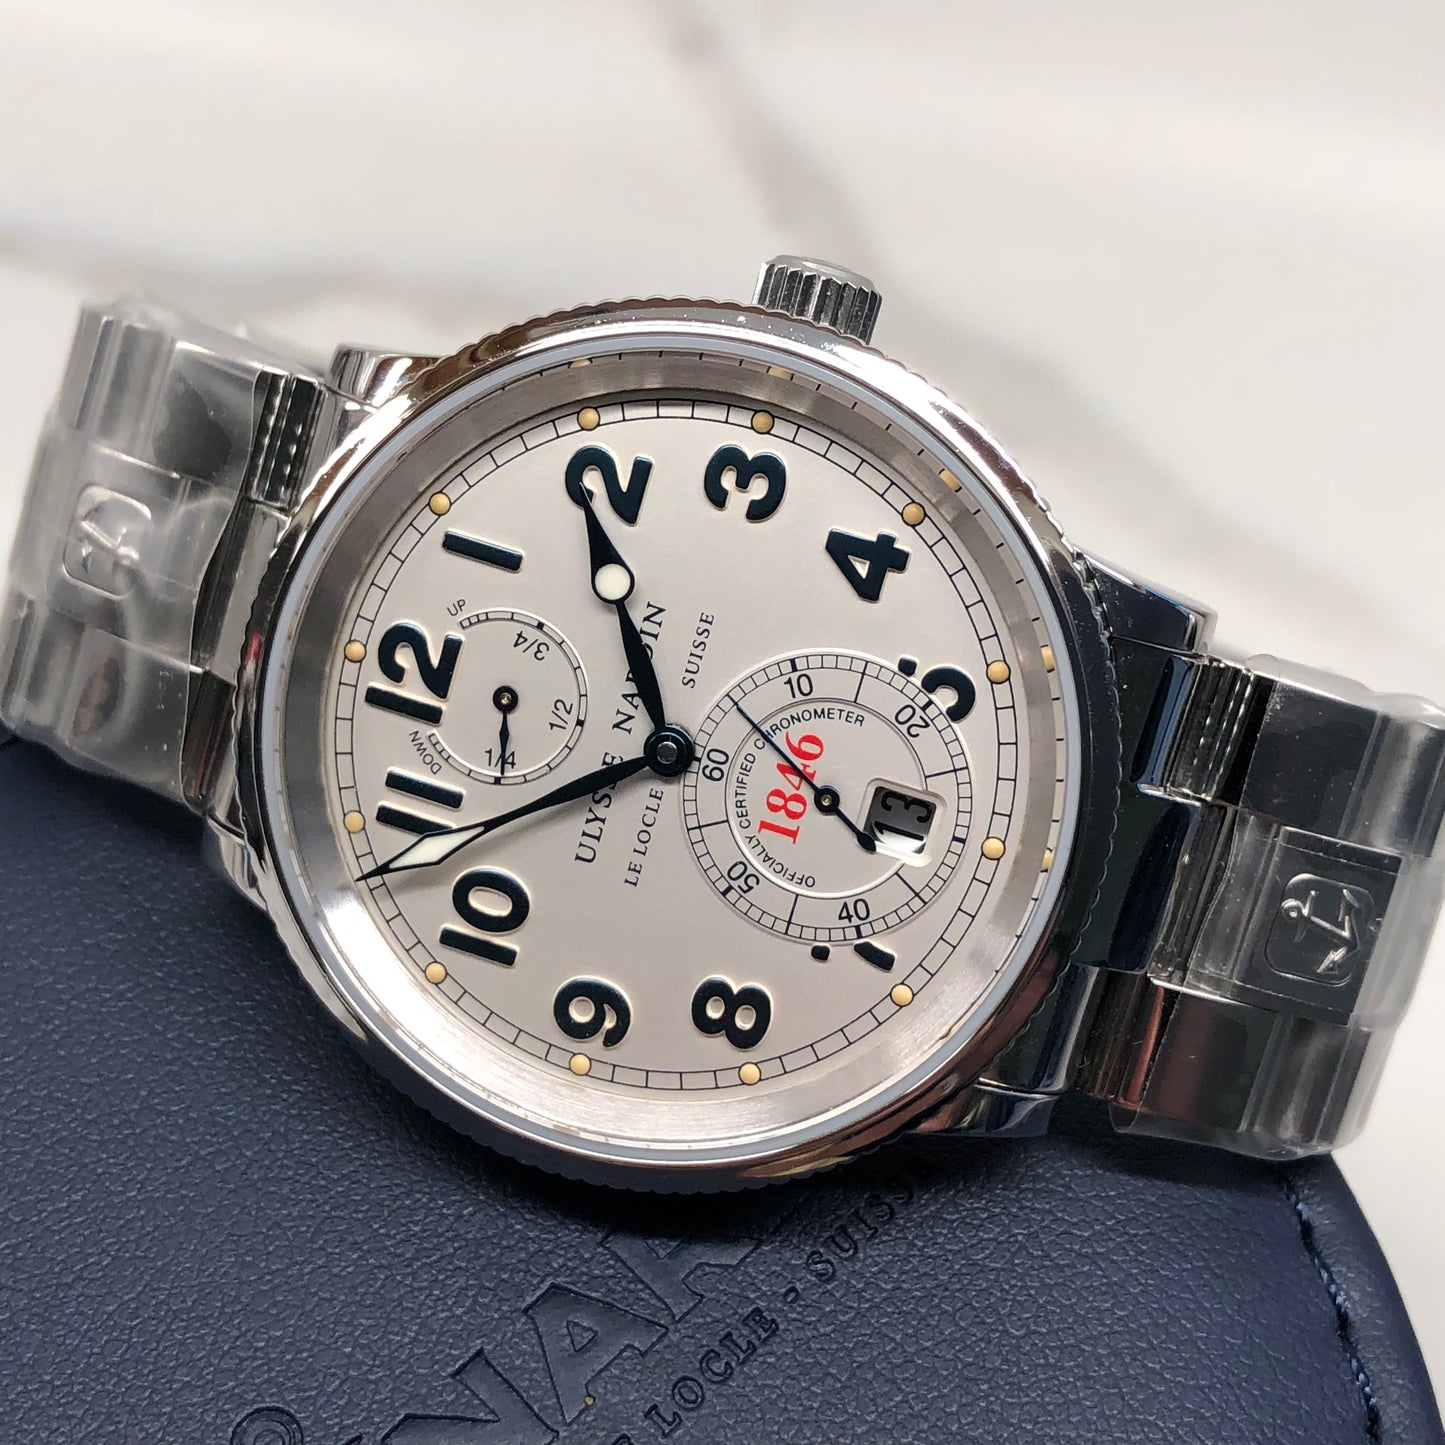 Ulysse Nardin Marine Chronometer 1846 T-263-22 Silver Dial Automatic 38mm Wristwatch with Service Papers - Hashtag Watch Company